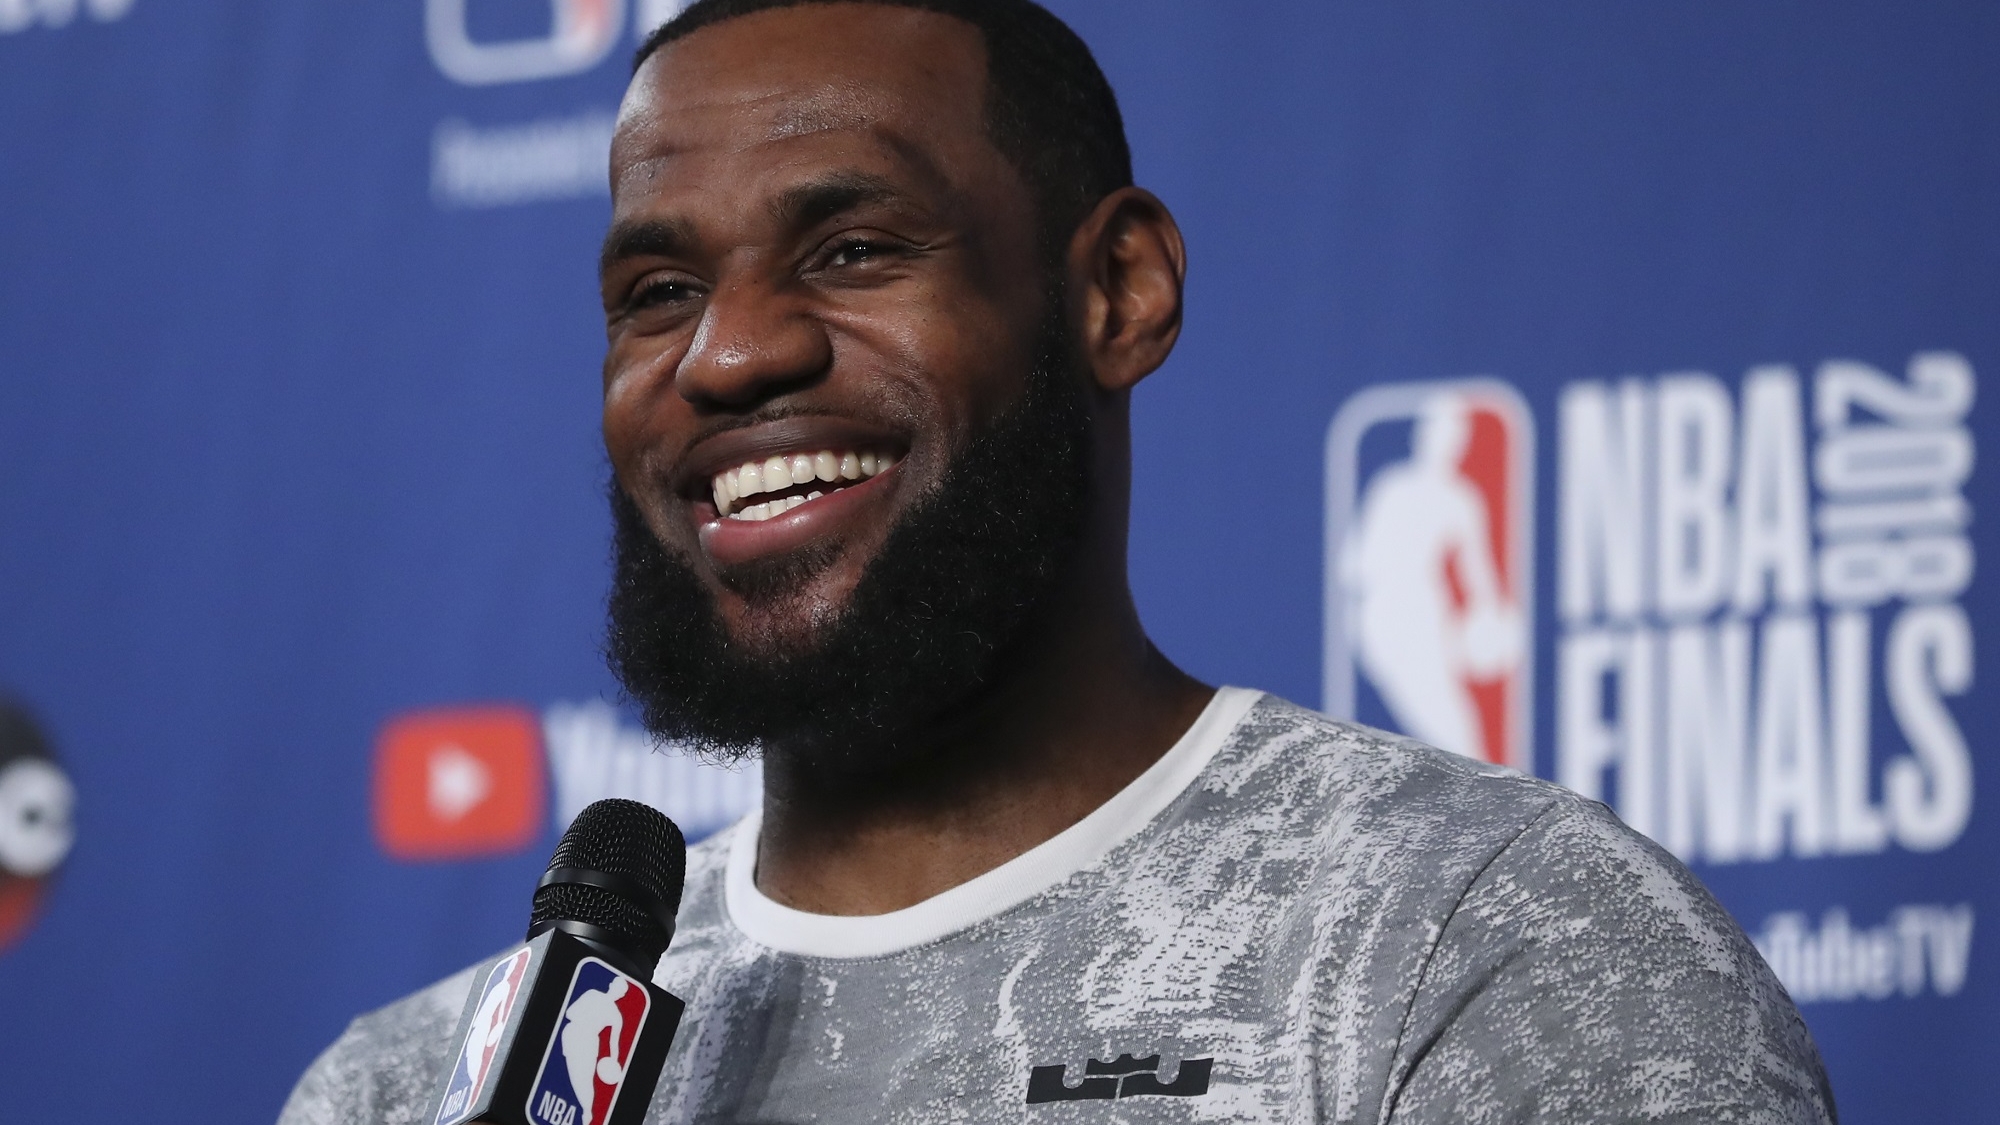 Cleveland Cavaliers forward LeBron James takes questions at a press conference after the basketball team's practiced during the NBA Finals, Thursday, June 7, 2018, in Cleveland. The Warriors lead the series 3-0 with Game 4 on Friday. (AP Photo/Carlos Osorio)